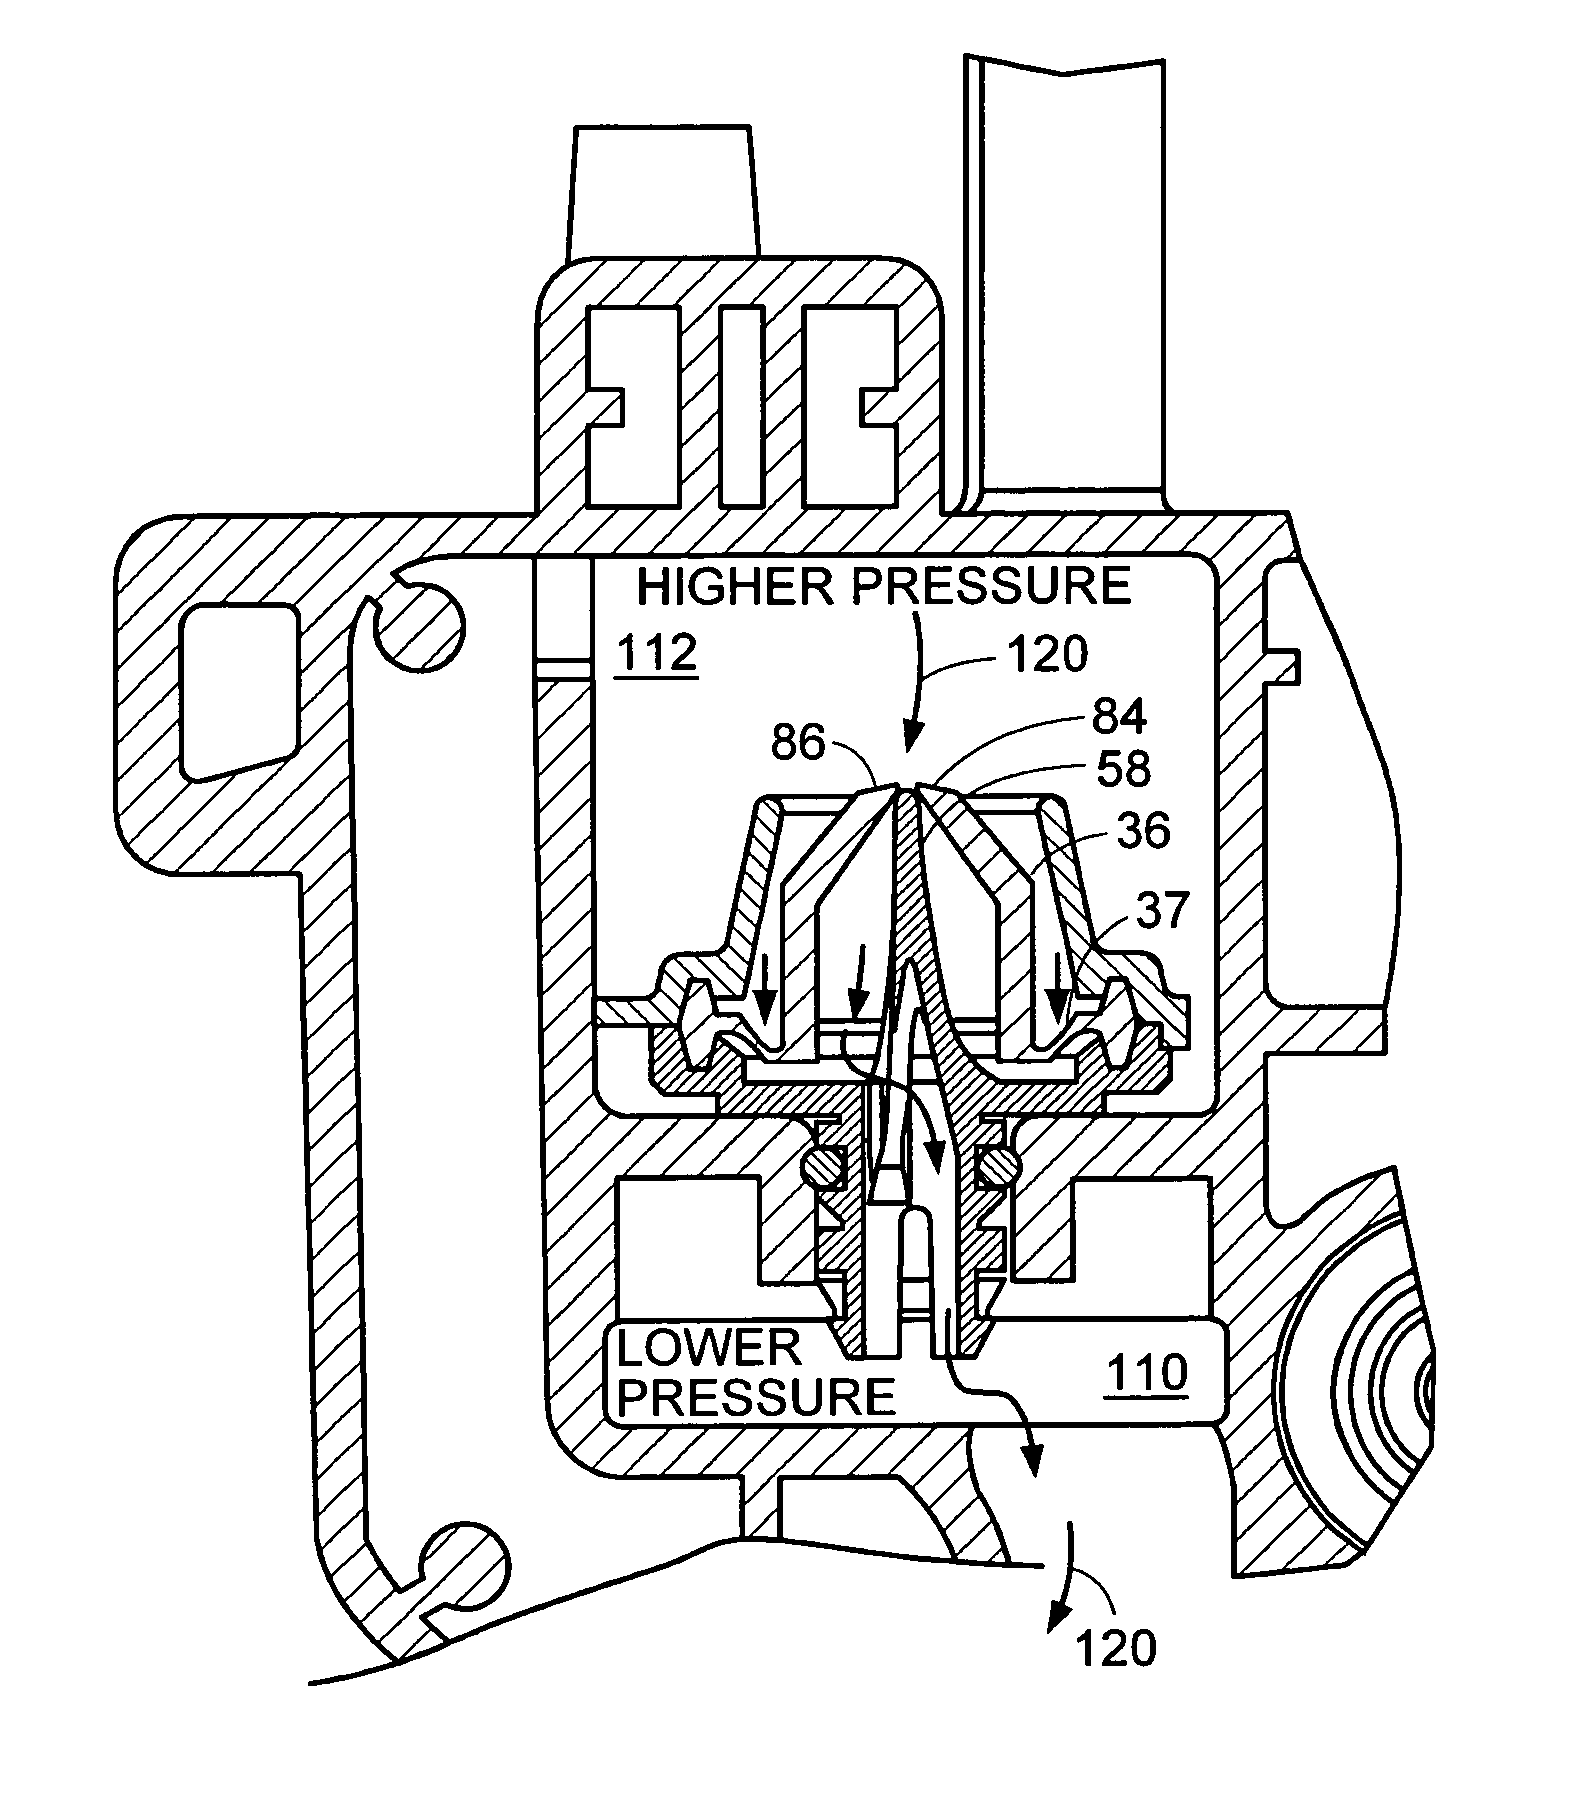 Valve for use with chest drainage system